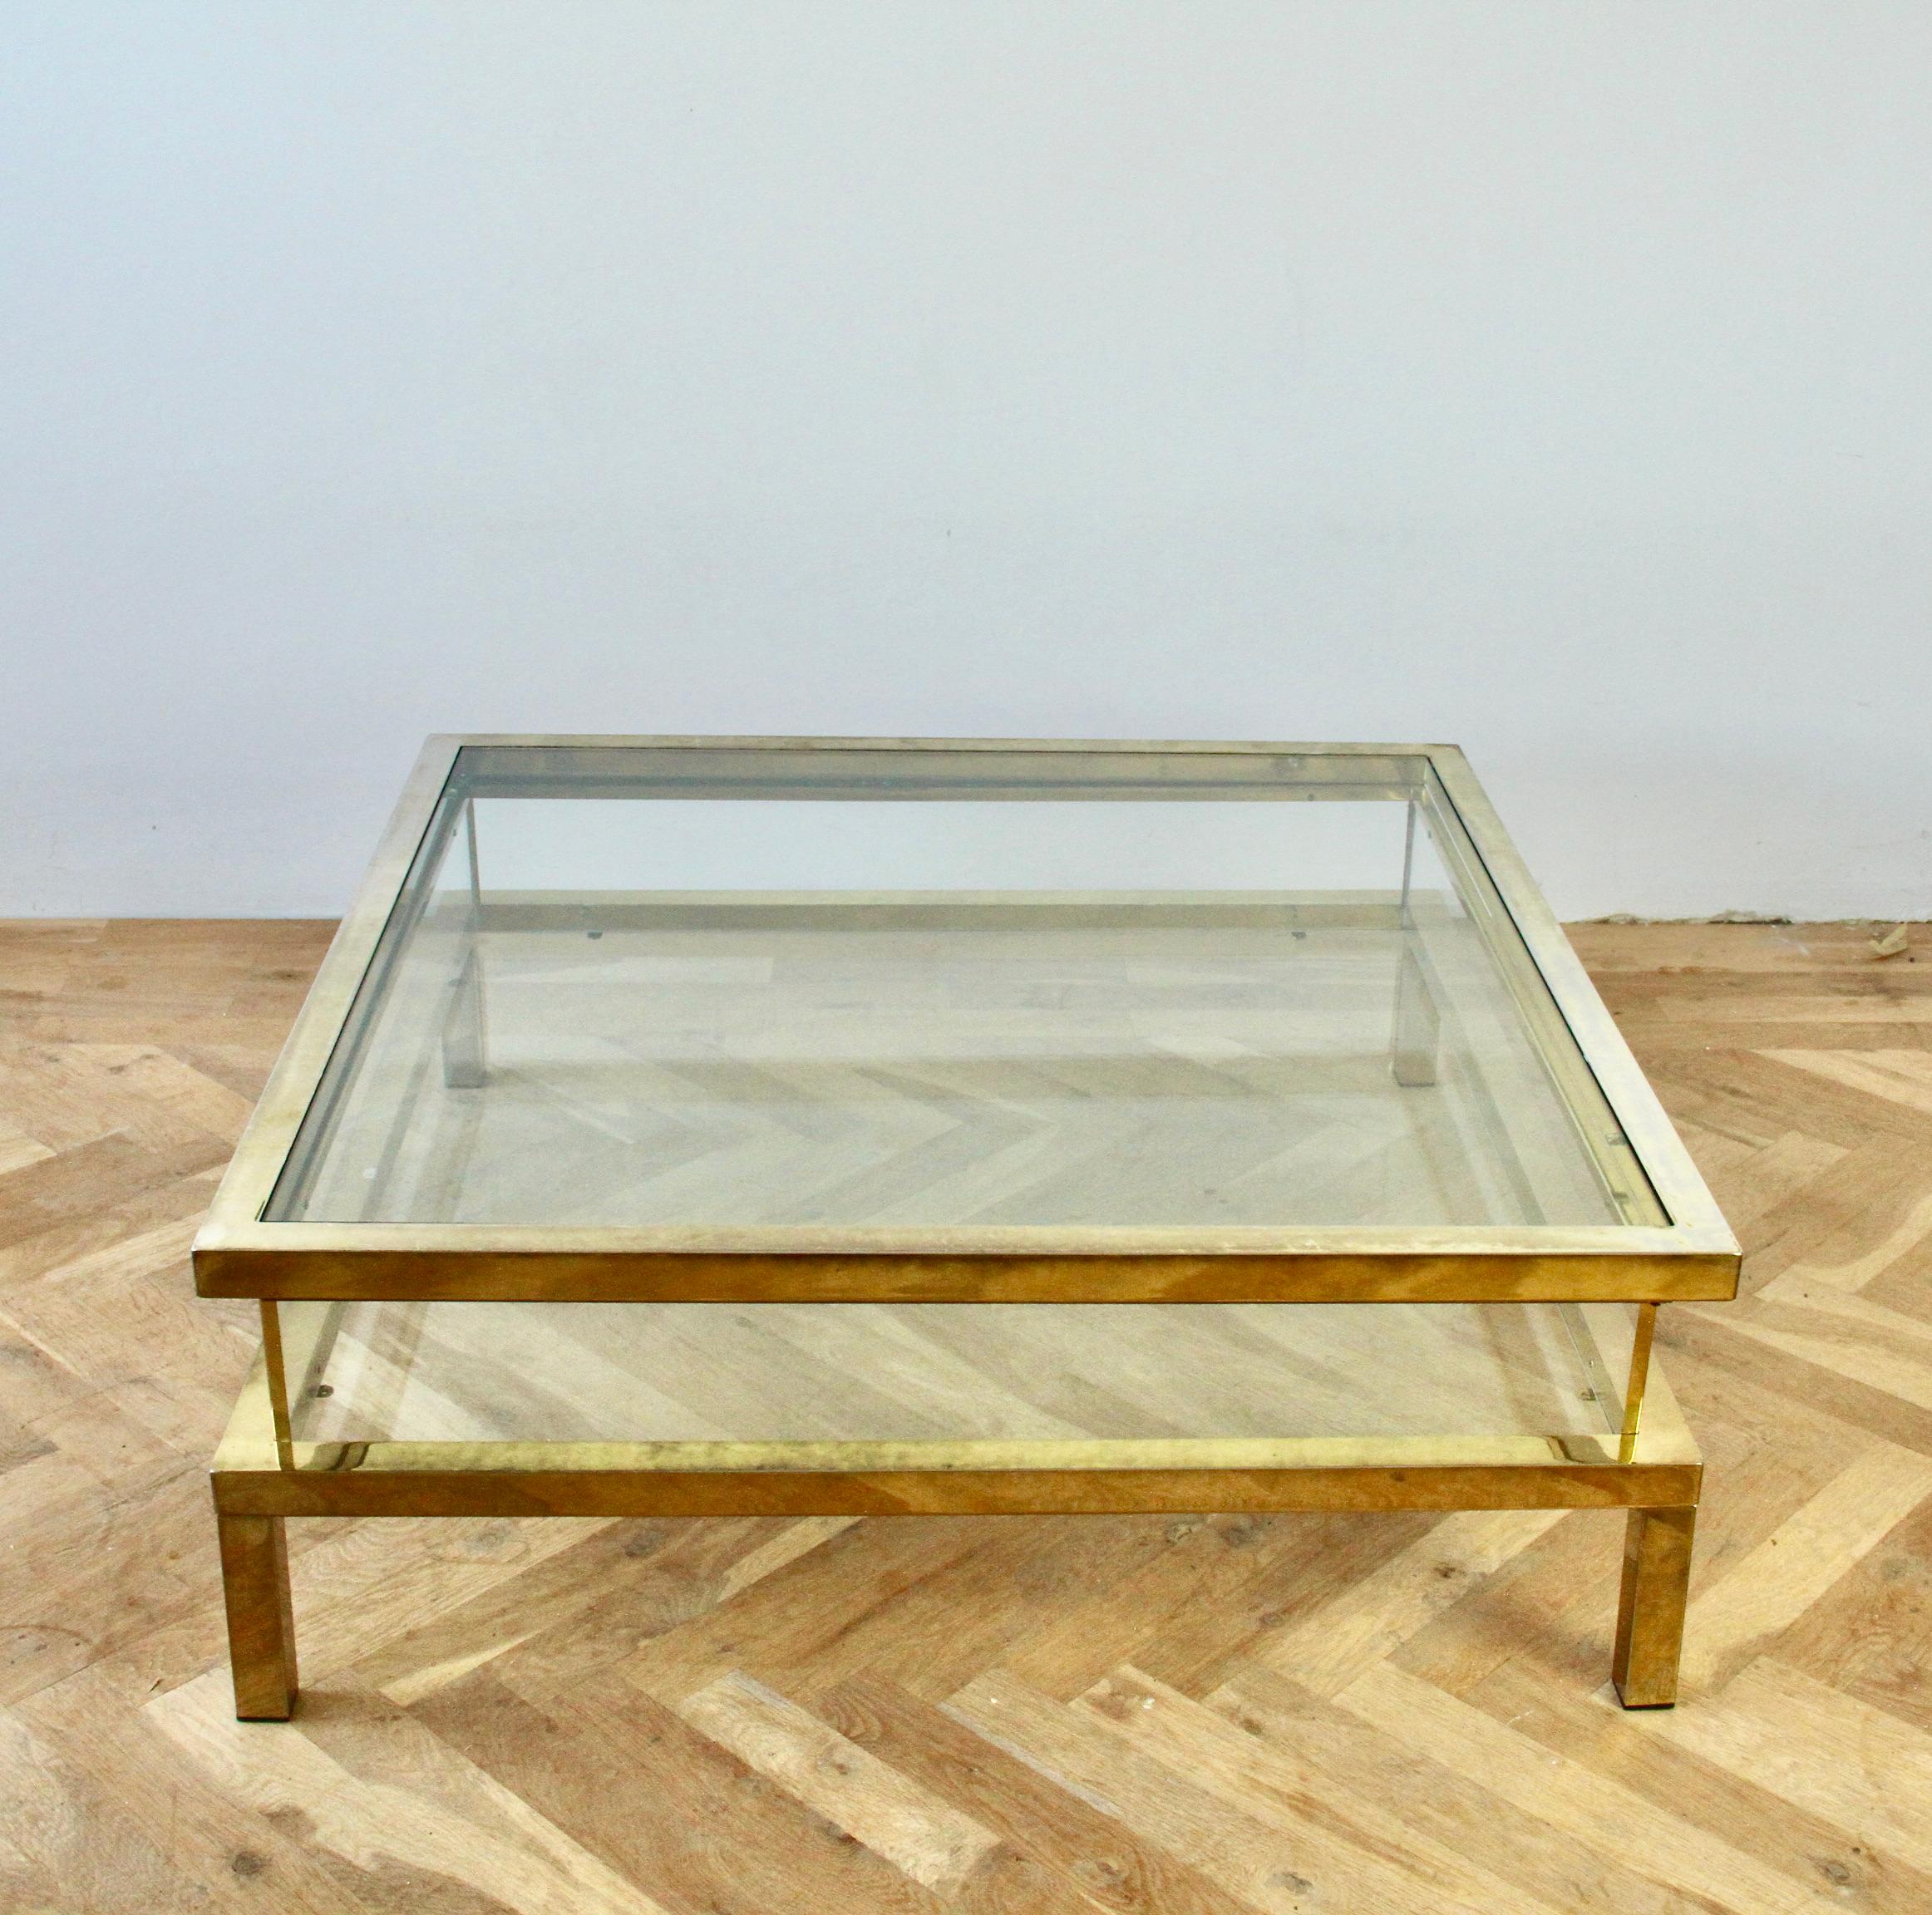 20th Century Maison Jansen Attributed Large Midcentury Brass Vitrine Sliding Top Coffee Table For Sale